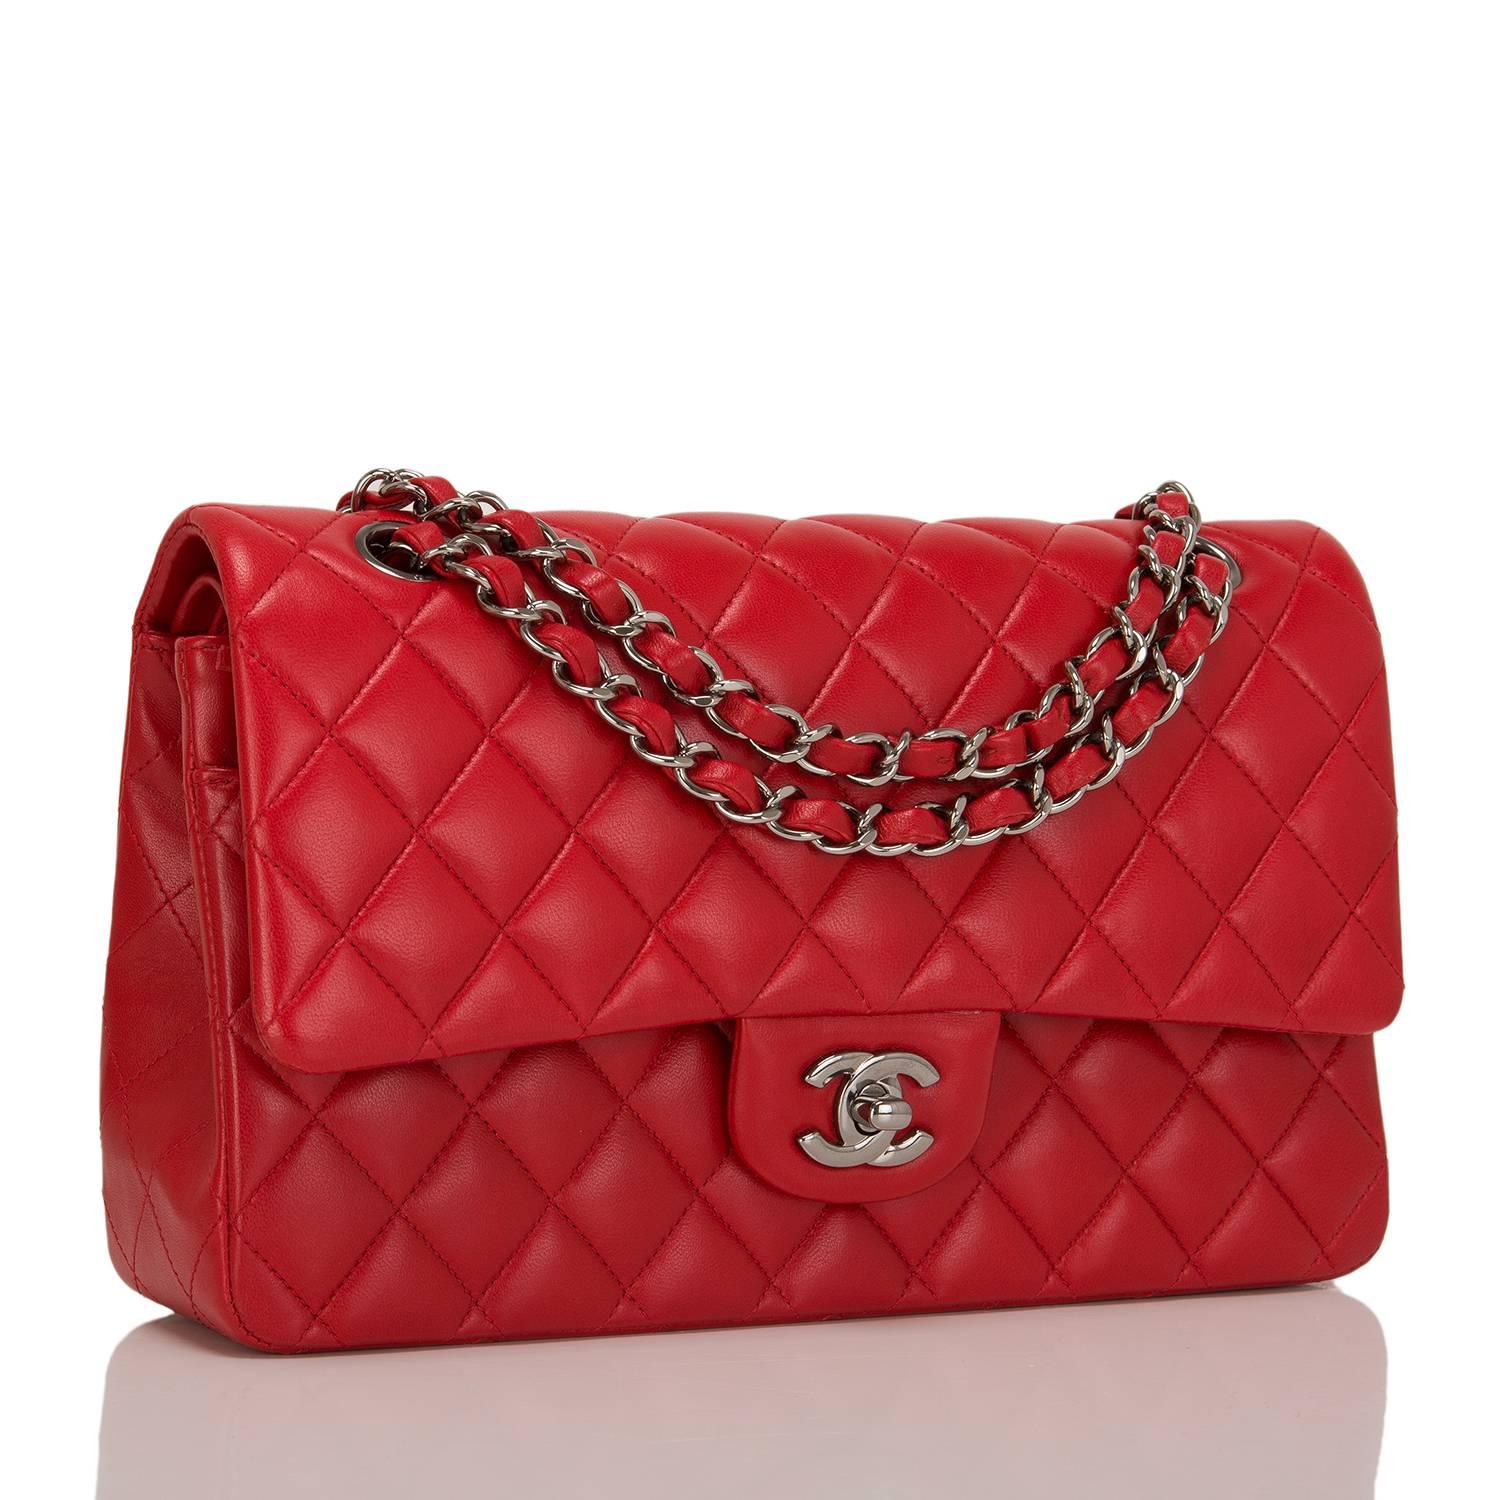 Chanel Medium Classic double flap bag of red quilted lambskin and ruthenium hardware features front flap with signature CC turnlock closure, half moon back pocket and adjustable interwoven aged ruthenium chain link and red leather shoulder